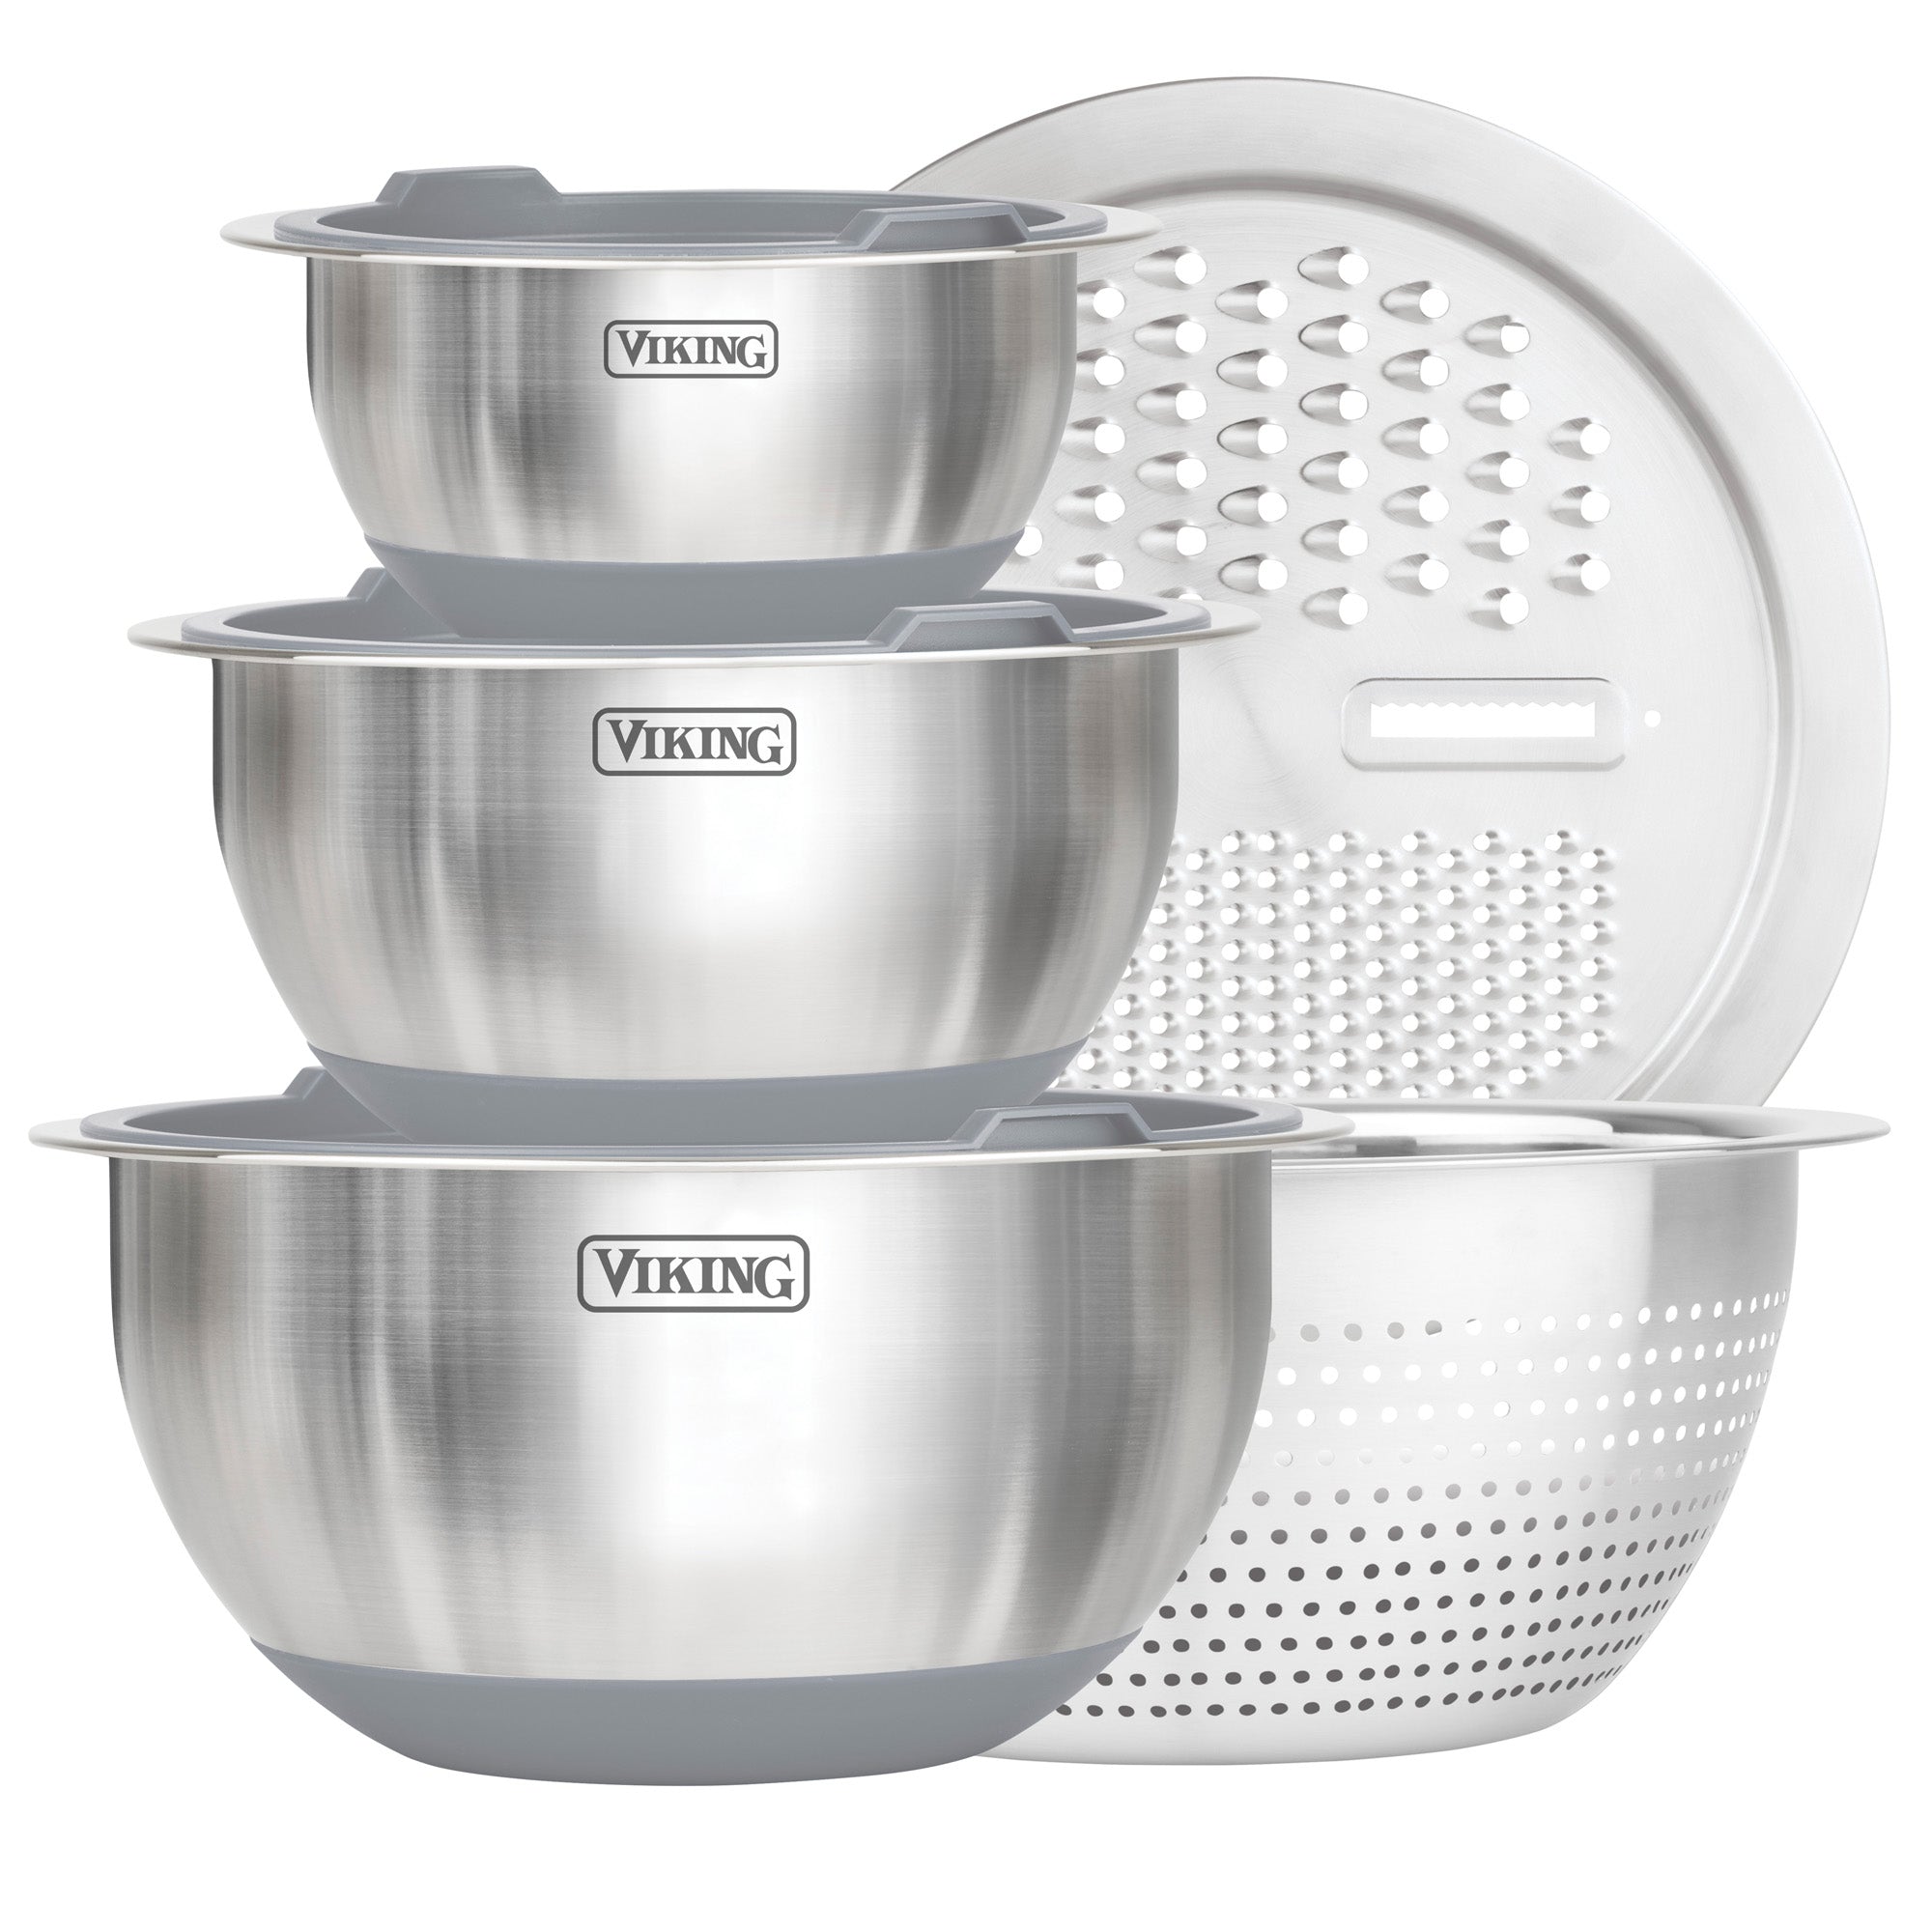 Viking 8-Piece Stainless Steel Mixing Bowl Set with Lids, Gray